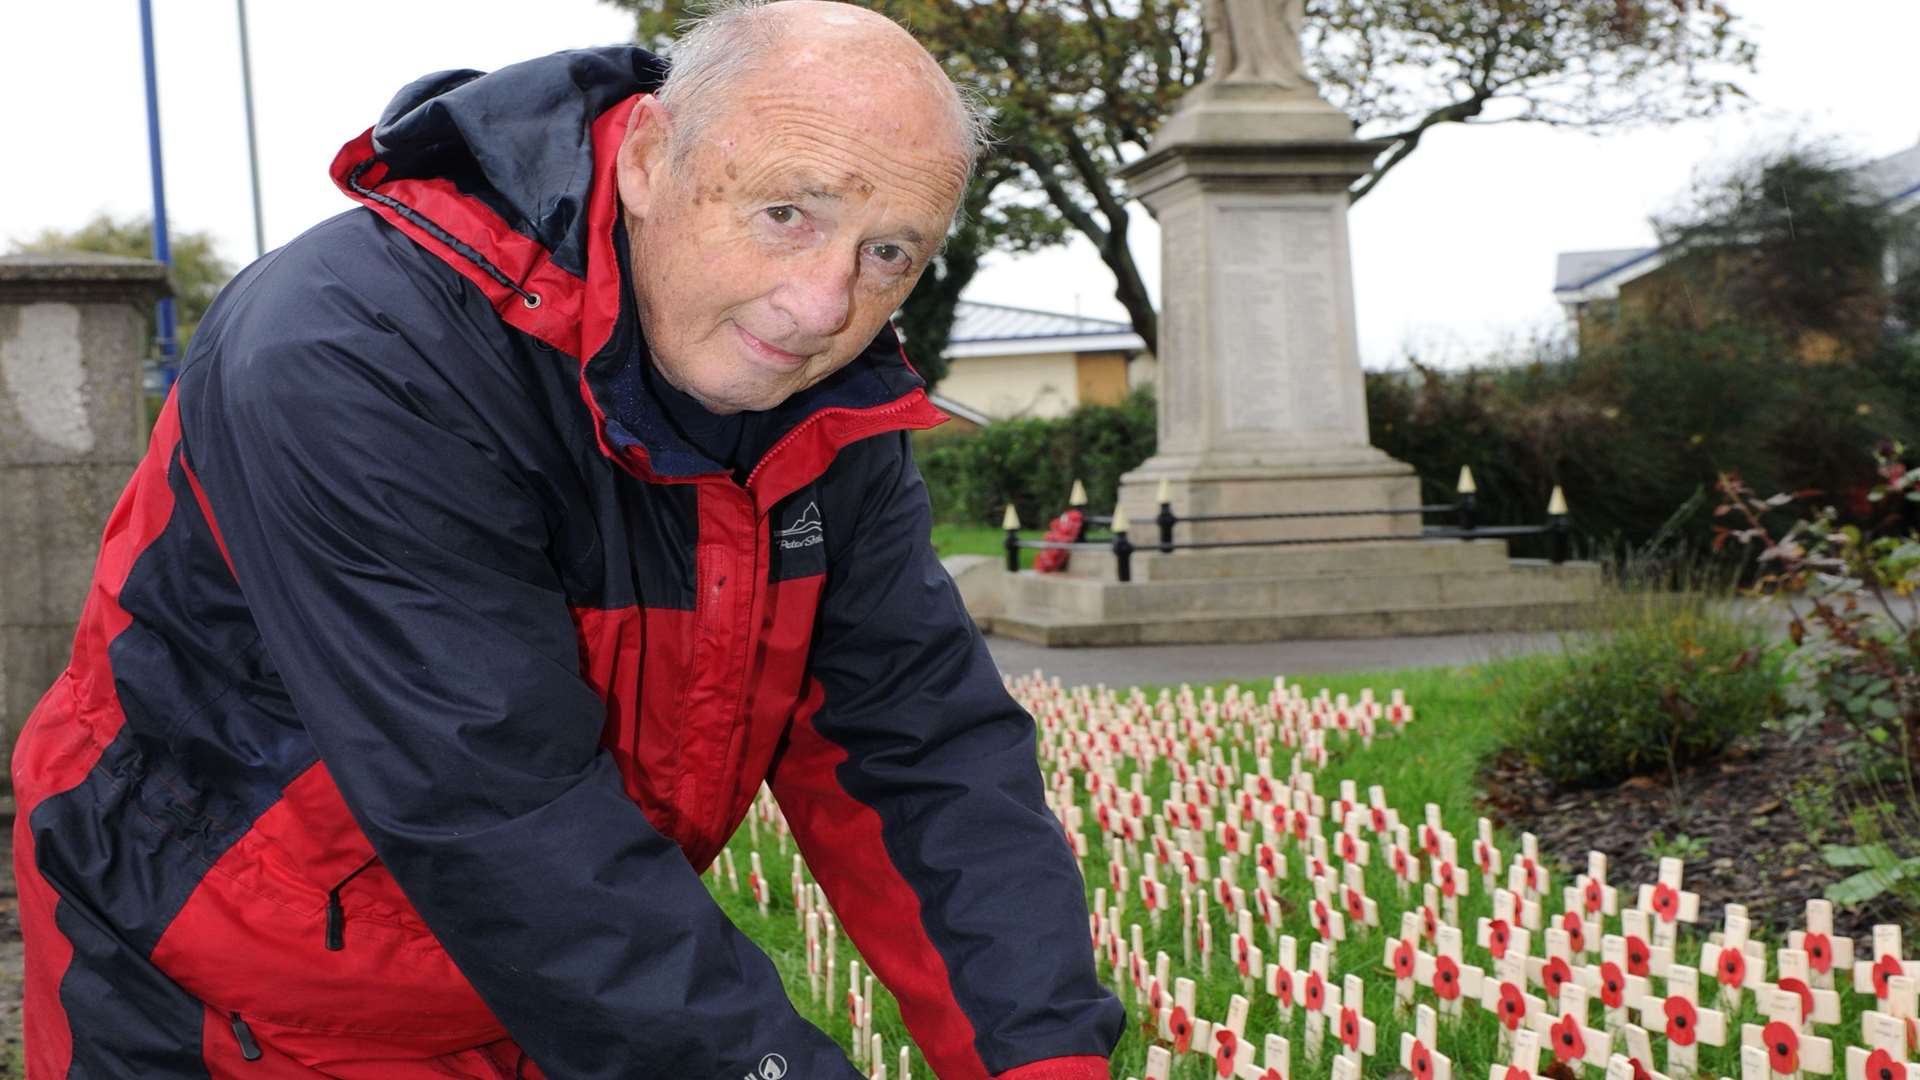 Peter Macdonald planting 600 wooden crosses at Sheerness War Memorial last year to mark the number of Island soldiers and civilians killed during the First World War.